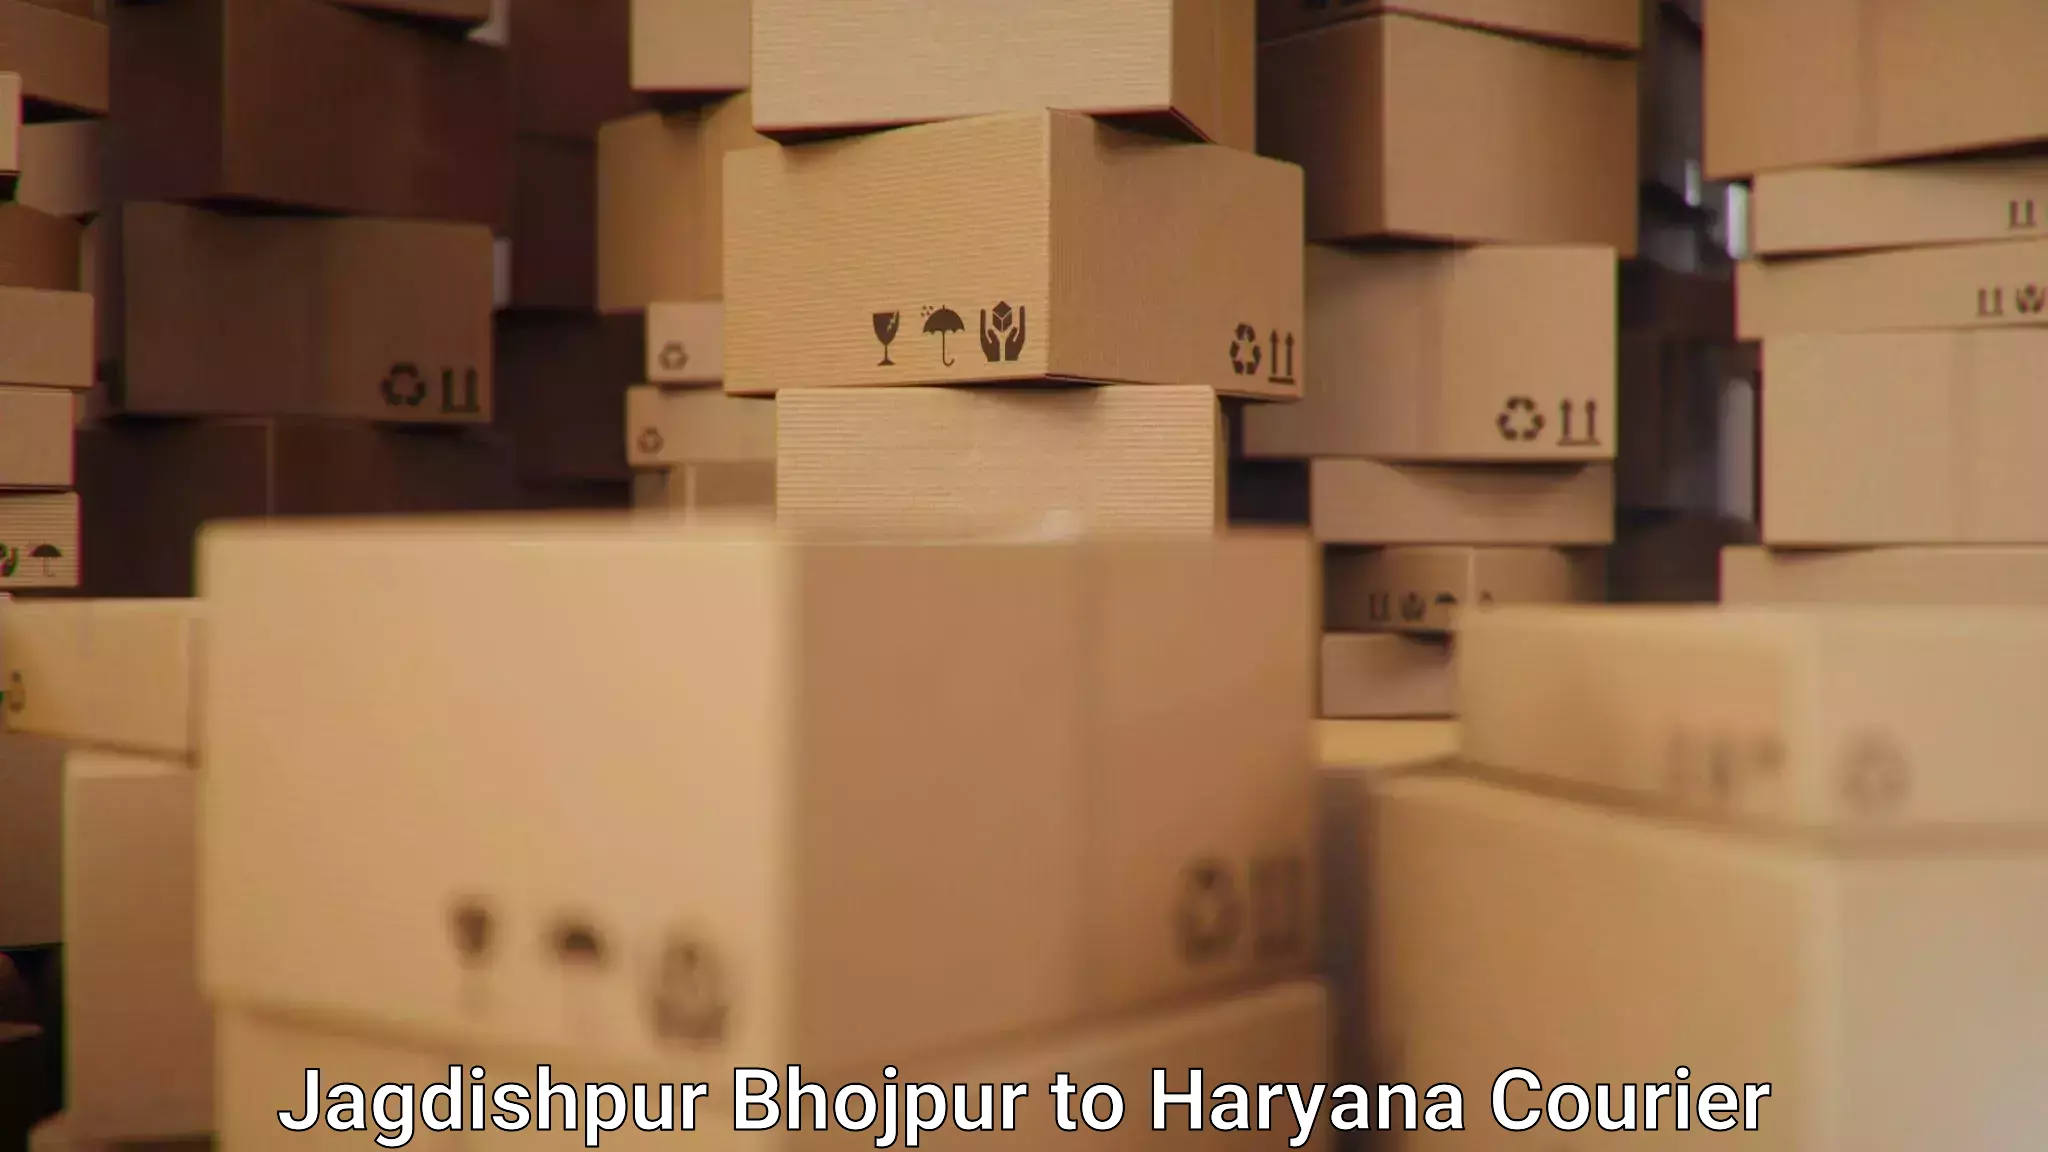 Reliable courier service Jagdishpur Bhojpur to Bhuna